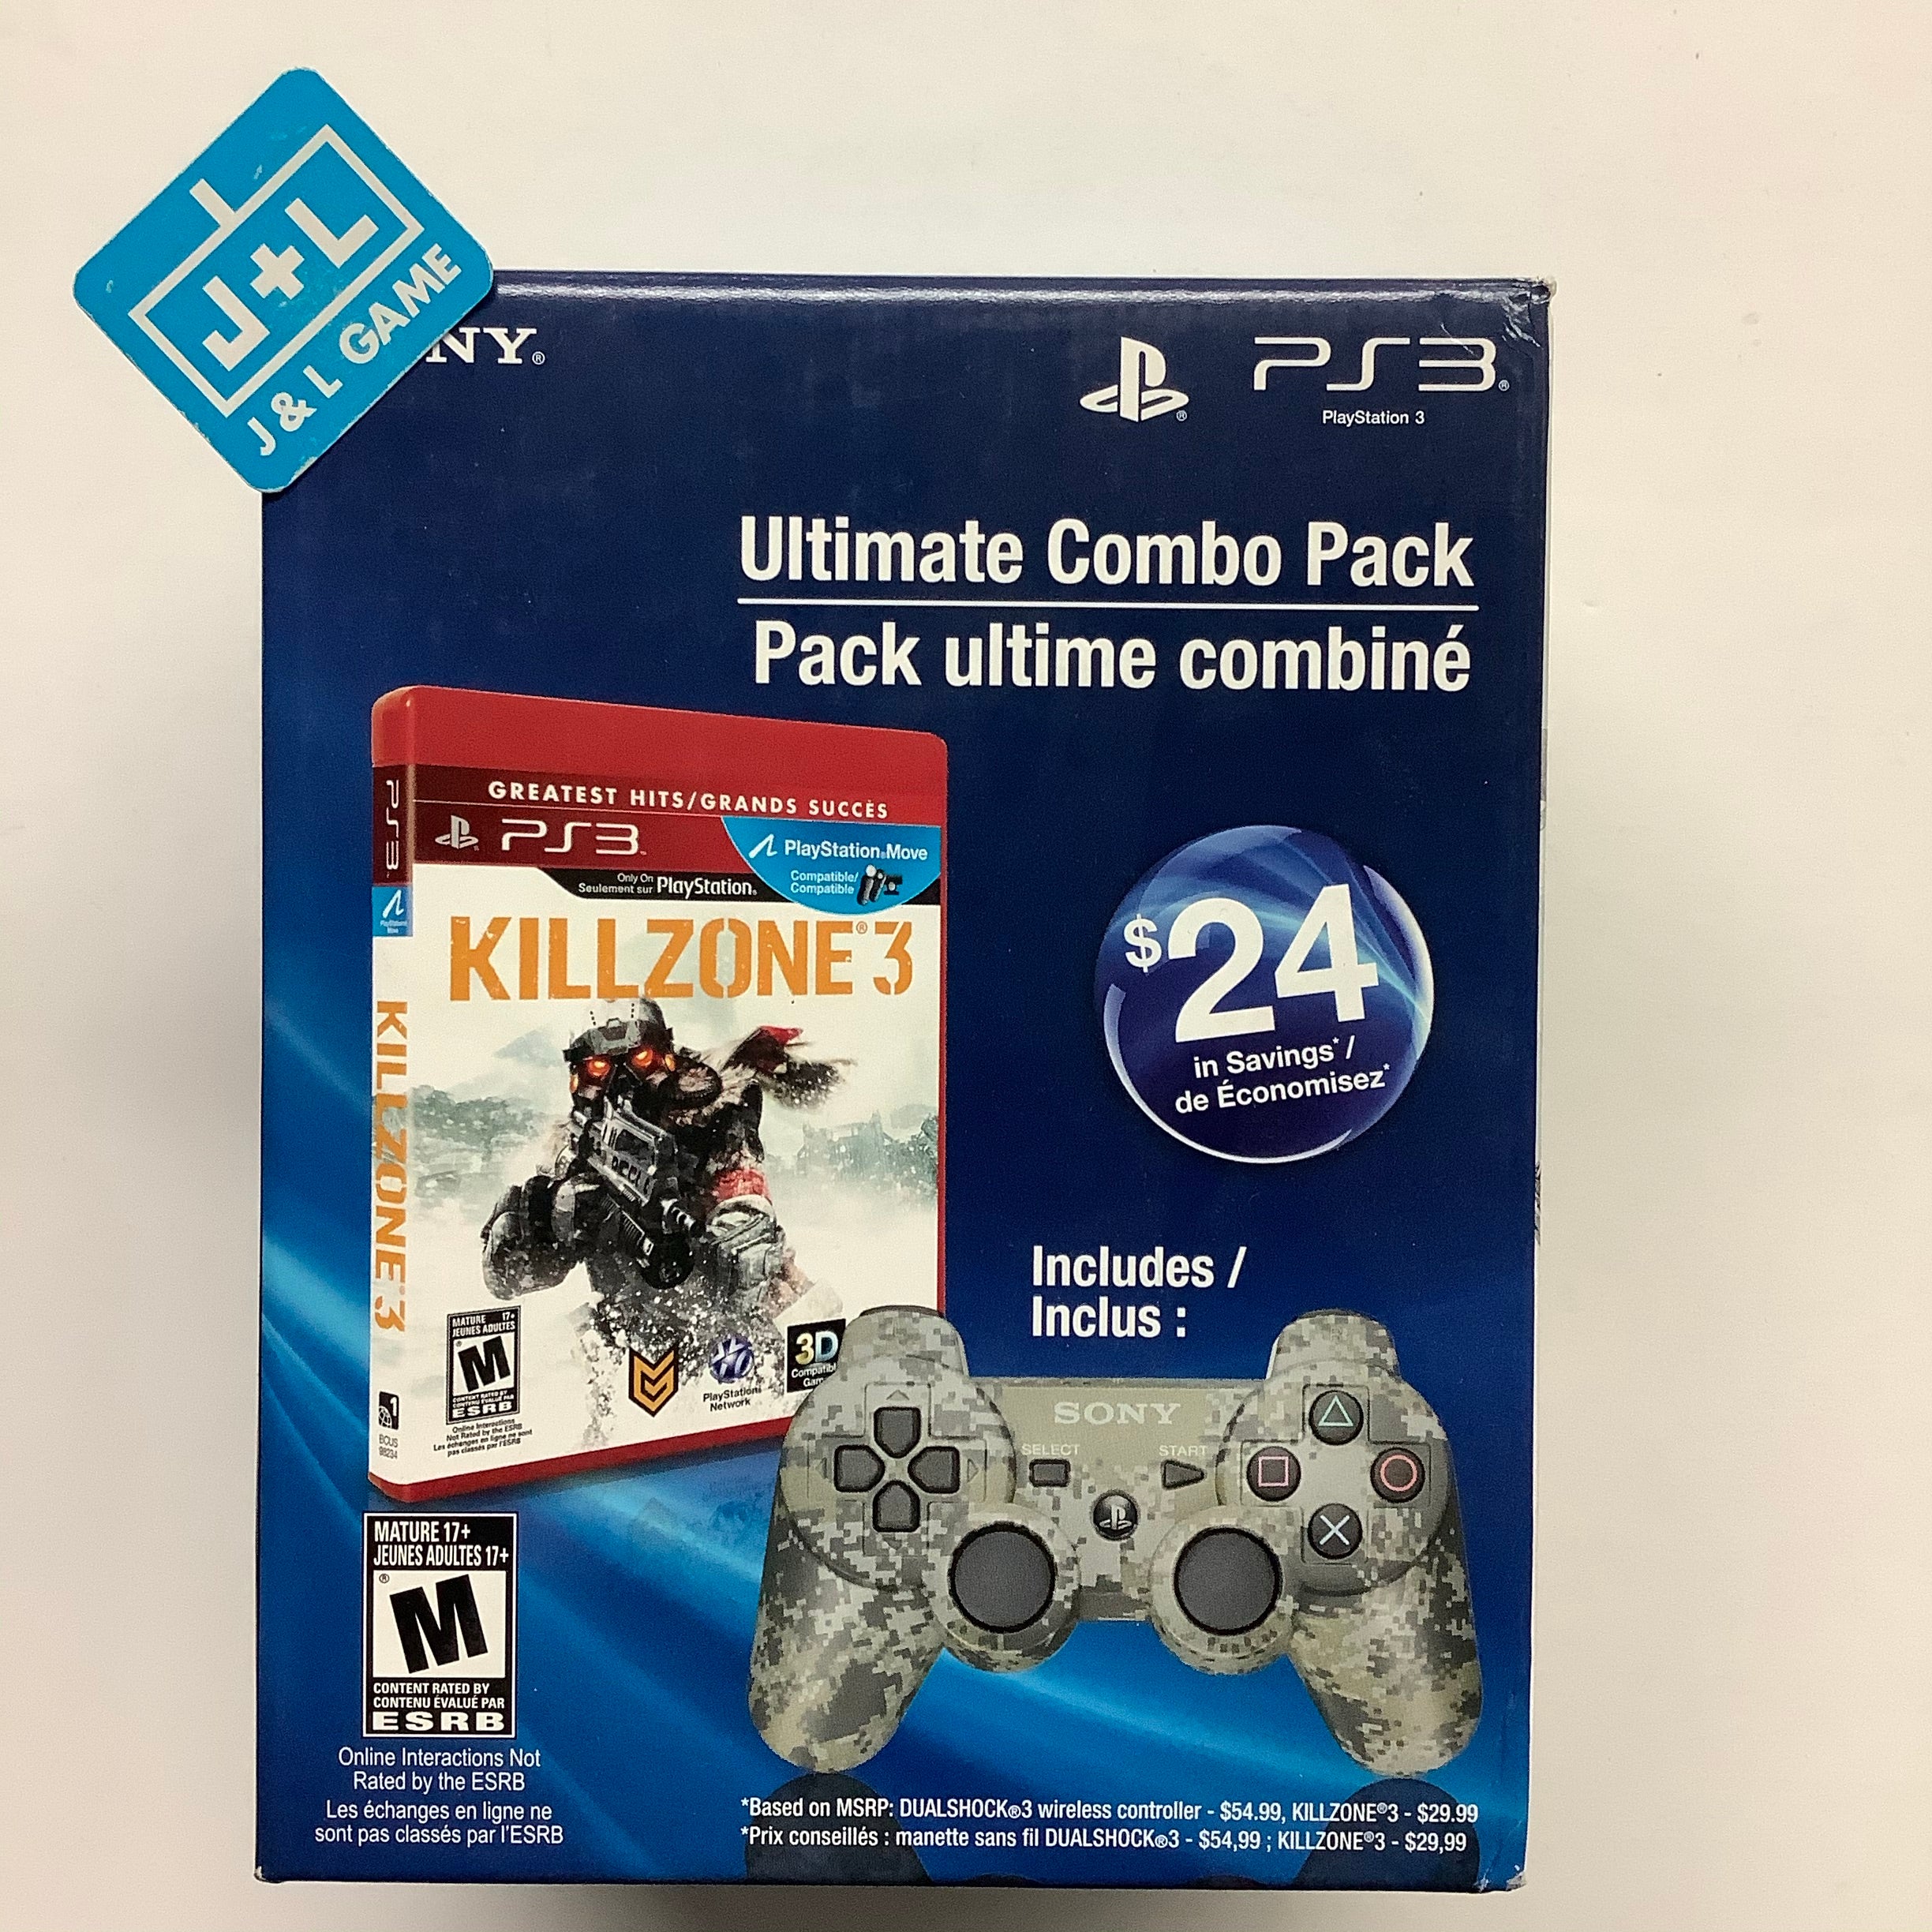 SONY Playstation 3 Killzone 3 & DUALSHOCK3 Wireless Controller - (PS3) Playstation 3 (Ultimate Combo Pack) Video Games PlayStation   